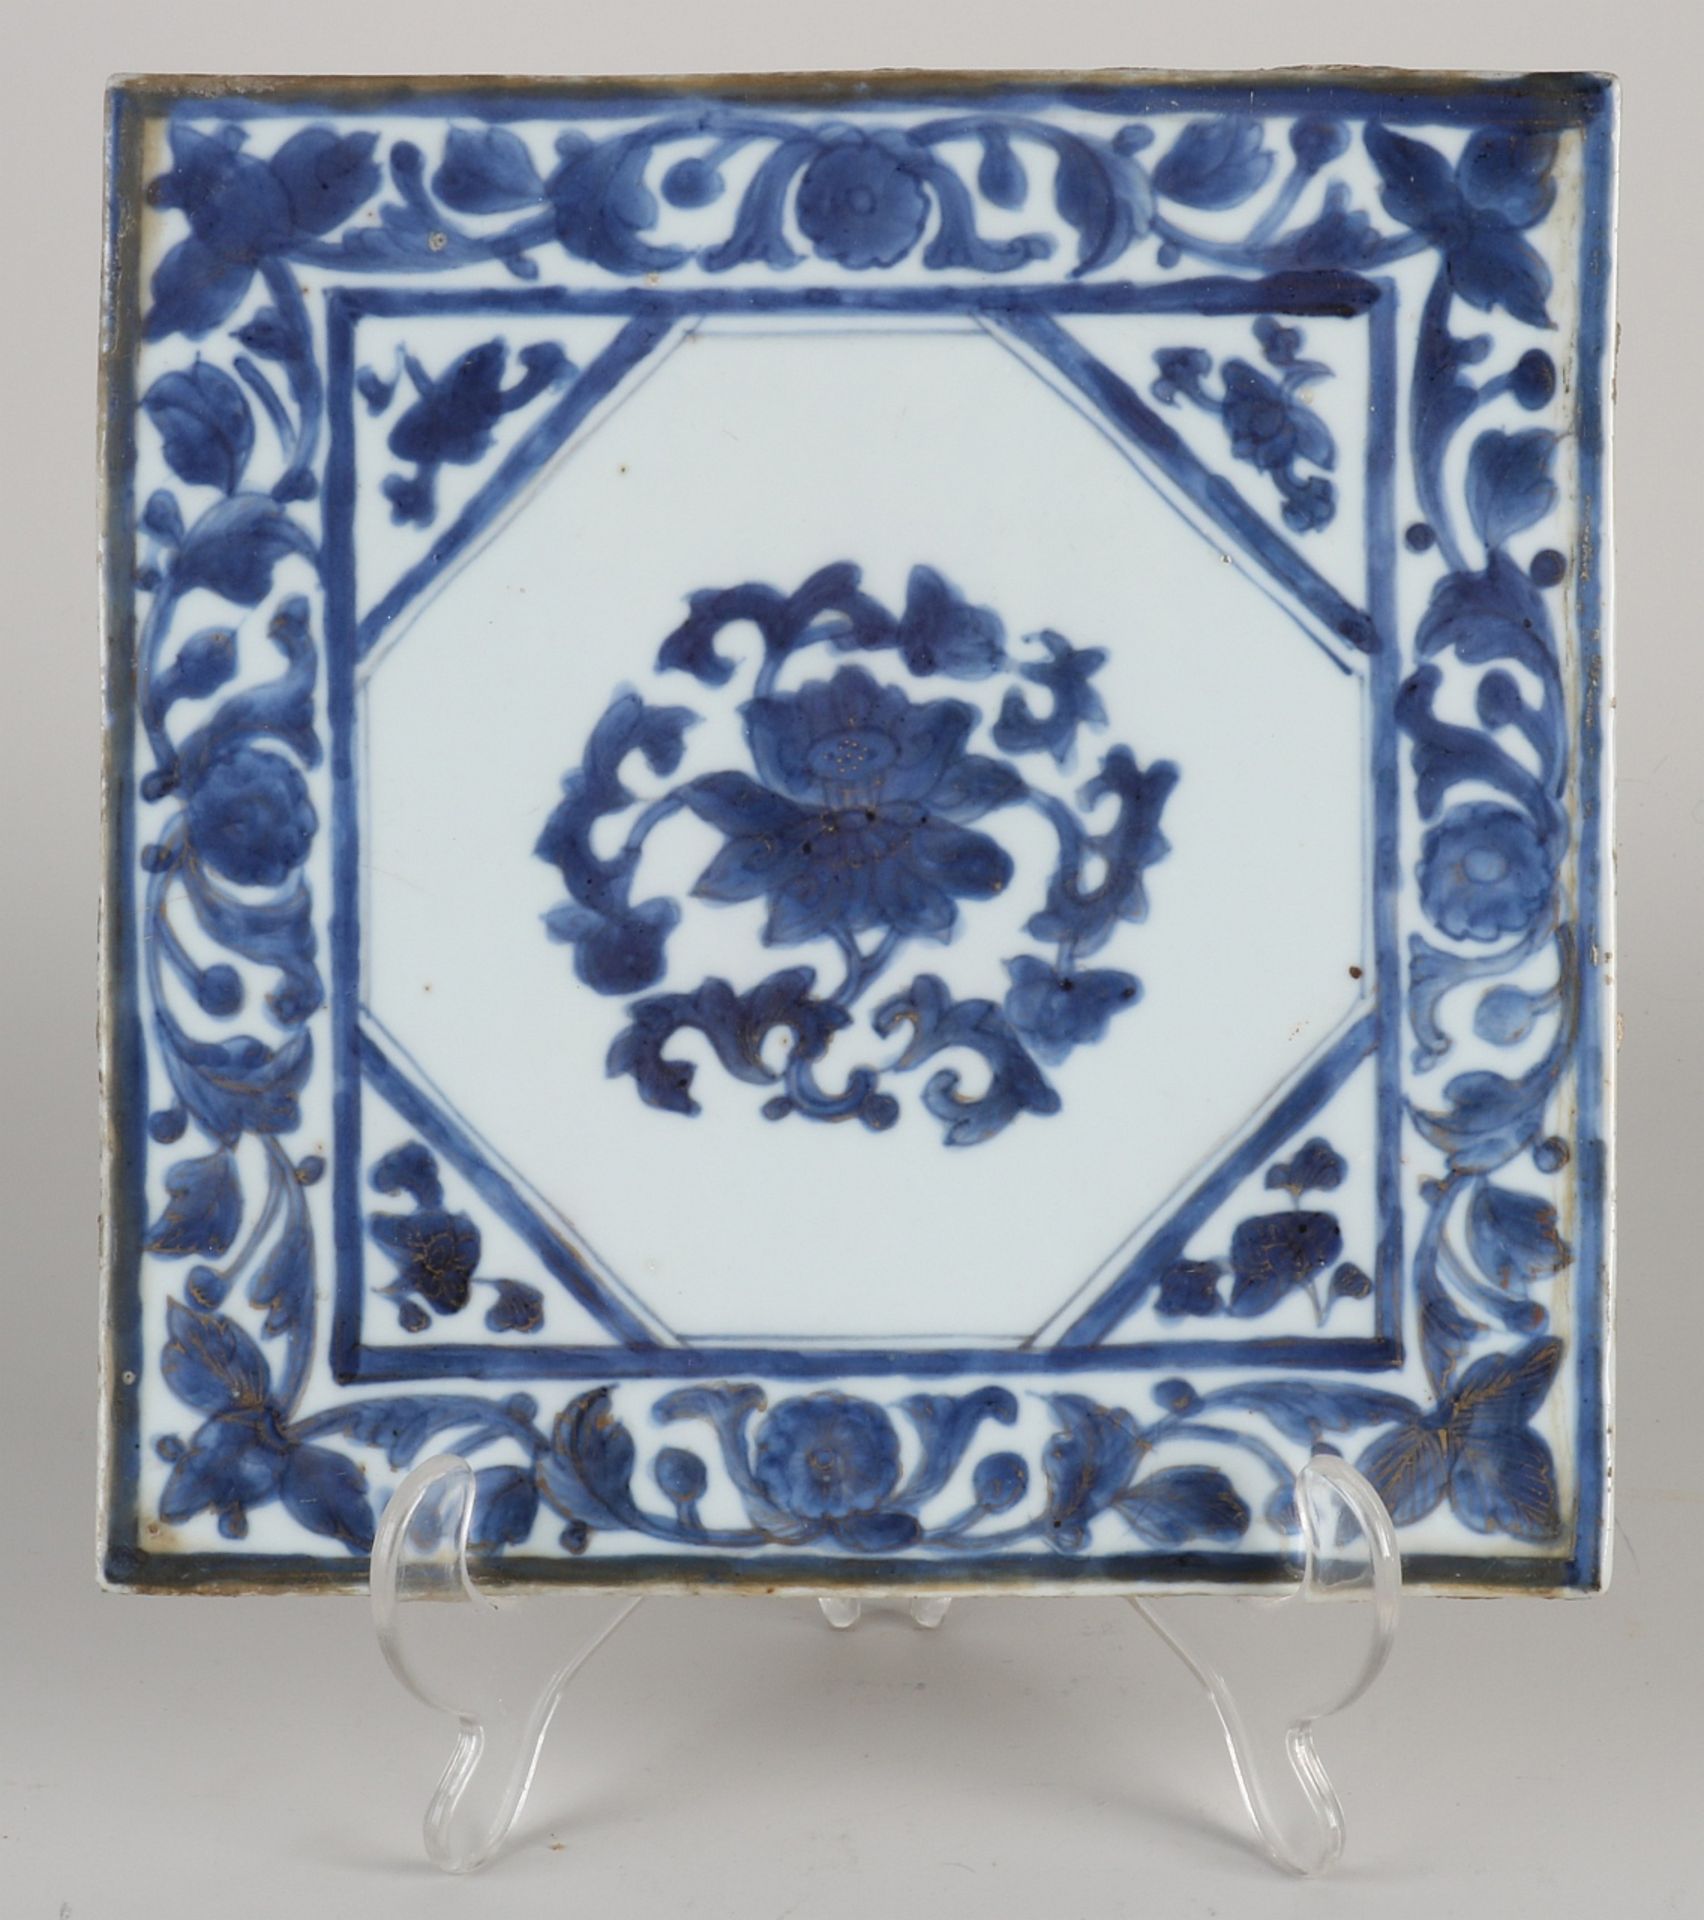 Antique Chinese Wall Tile